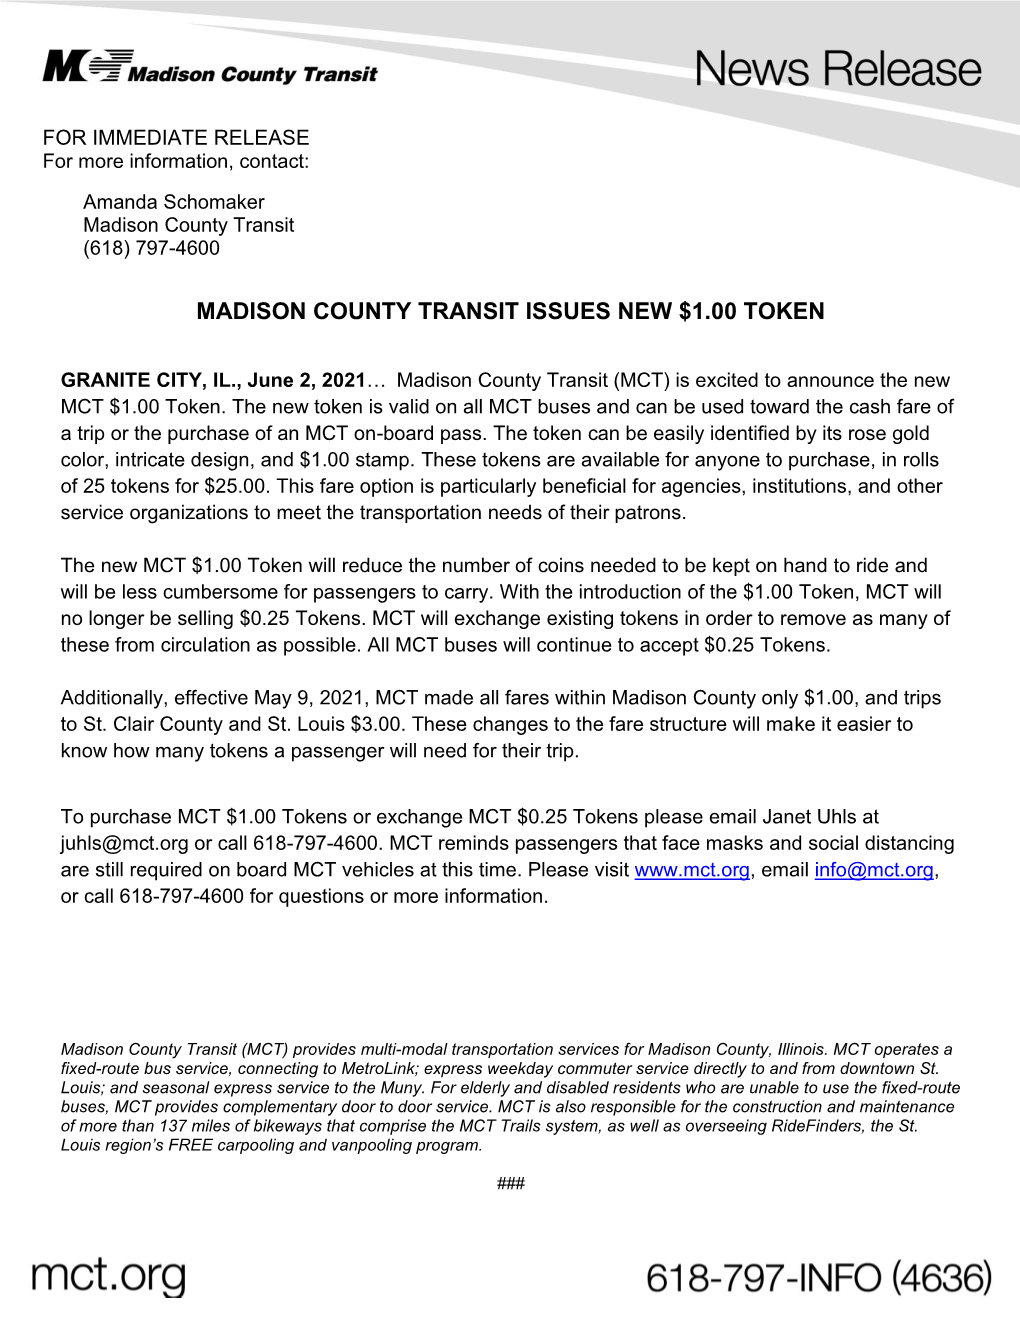 Madison County Transit Issues New $1.00 Token